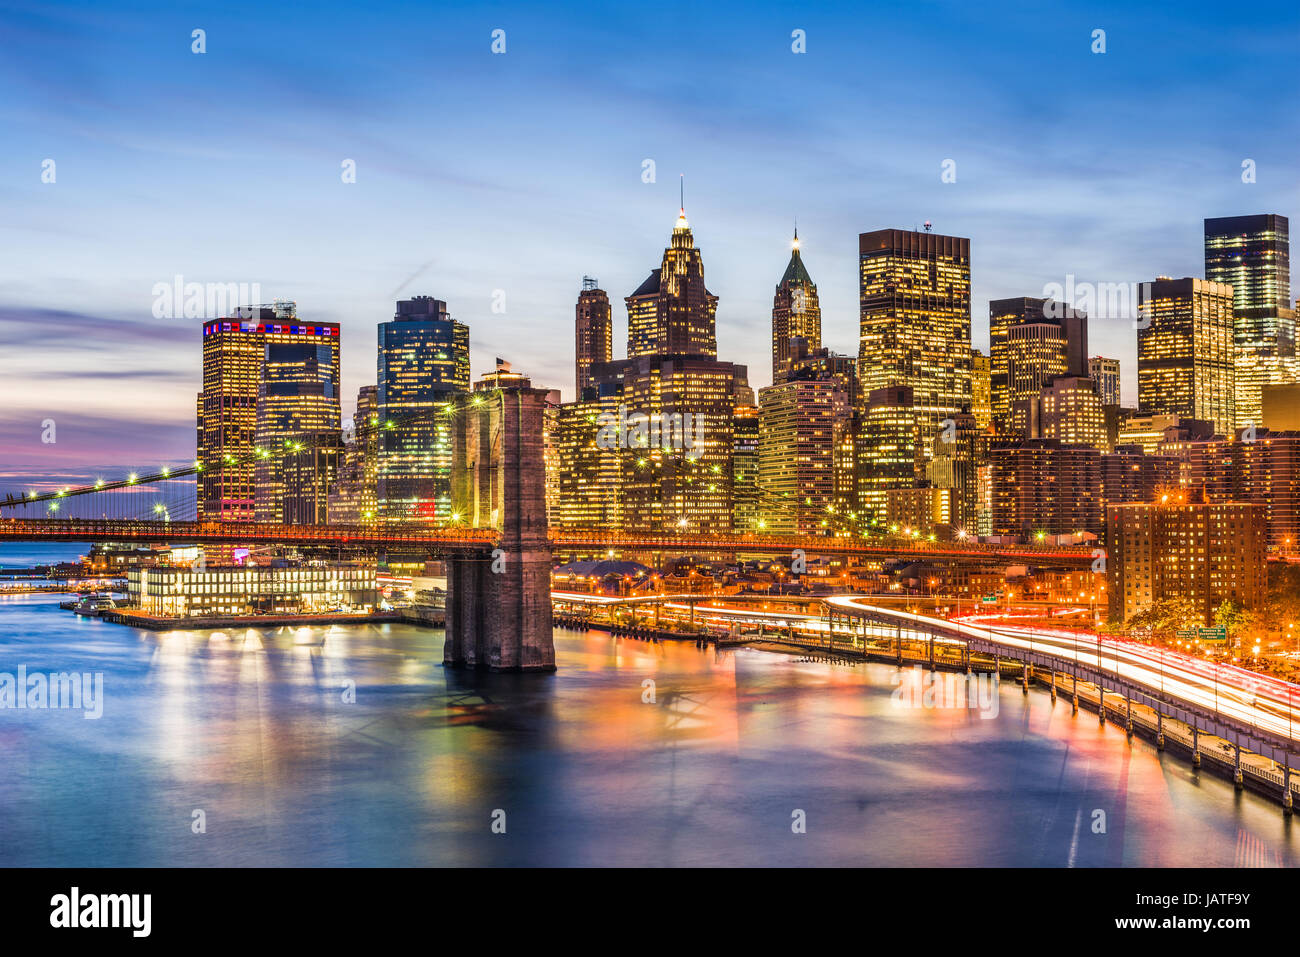 New York City skyline with the Brooklyn Bridge and Financial district on the East River. Stock Photo